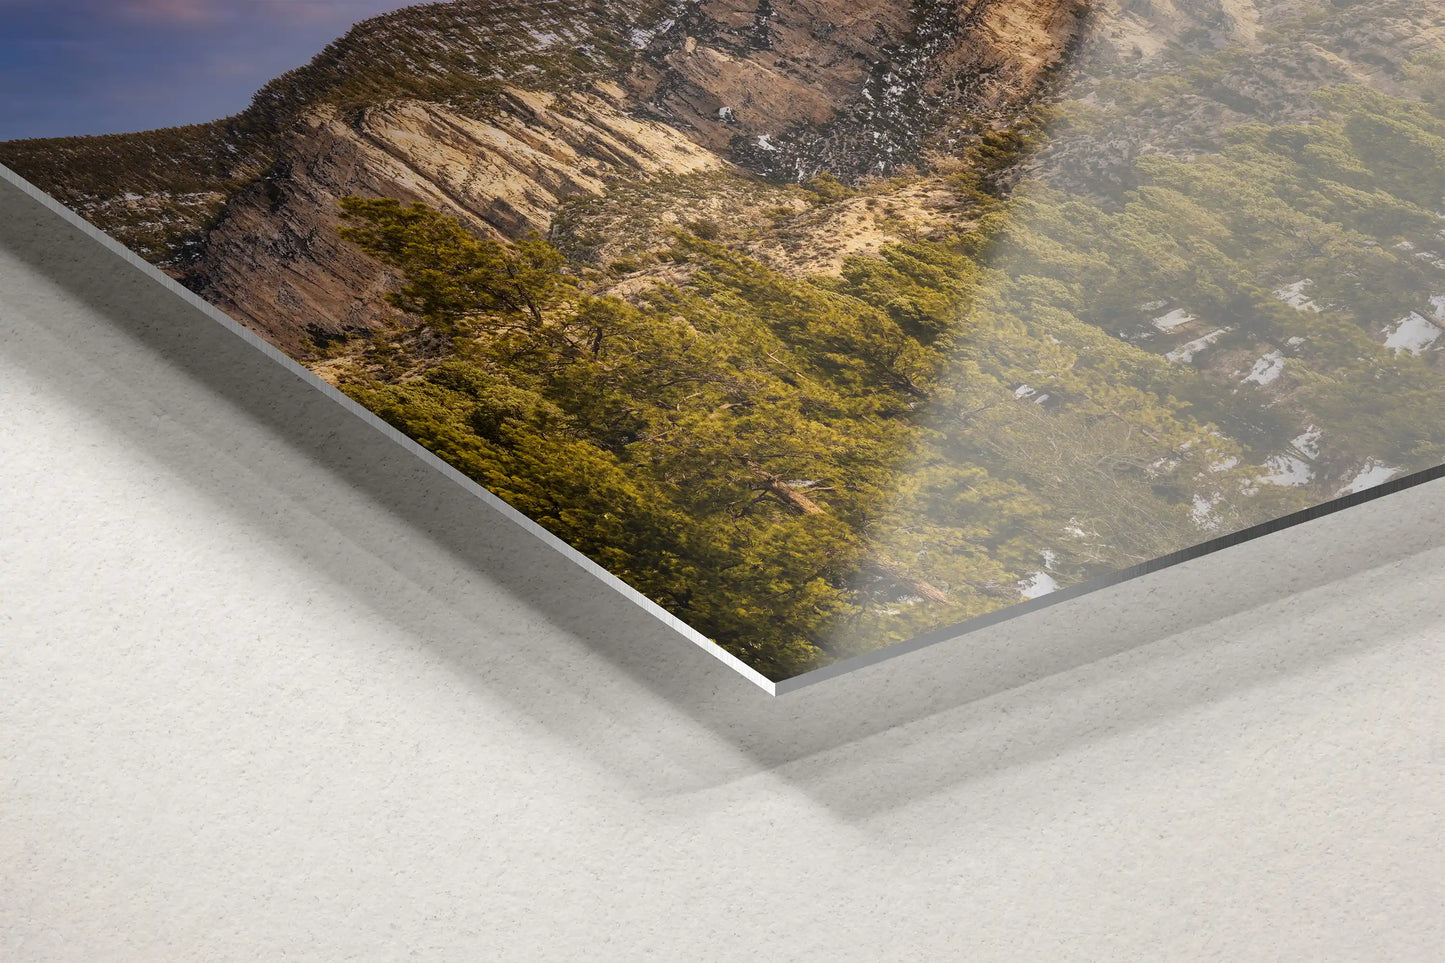 A detailed view of the metal print's edge, displaying Fletcher Peak at Mt Charleston, symbolizing the durable elegance and reflective vibrancy of the art piece.